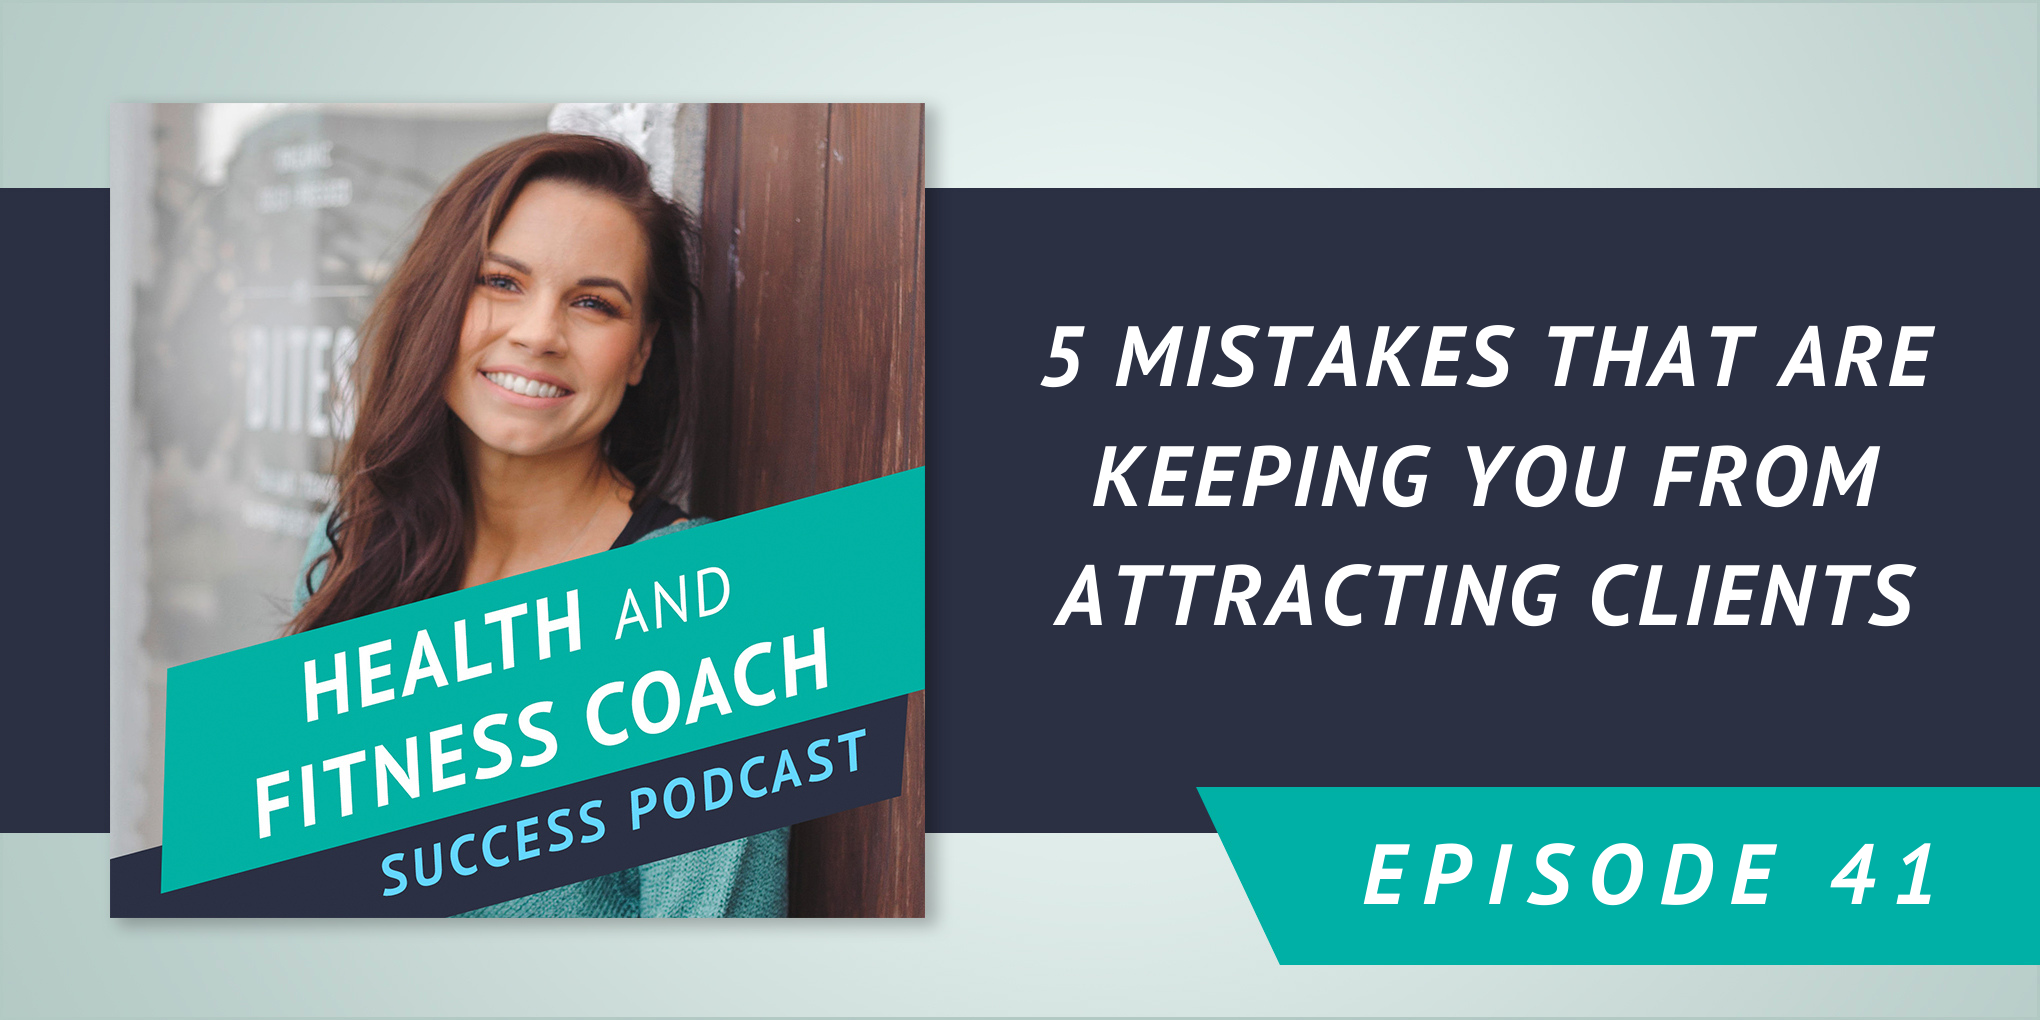 5 Mistakes That Are Keeping You From Attracting Clients